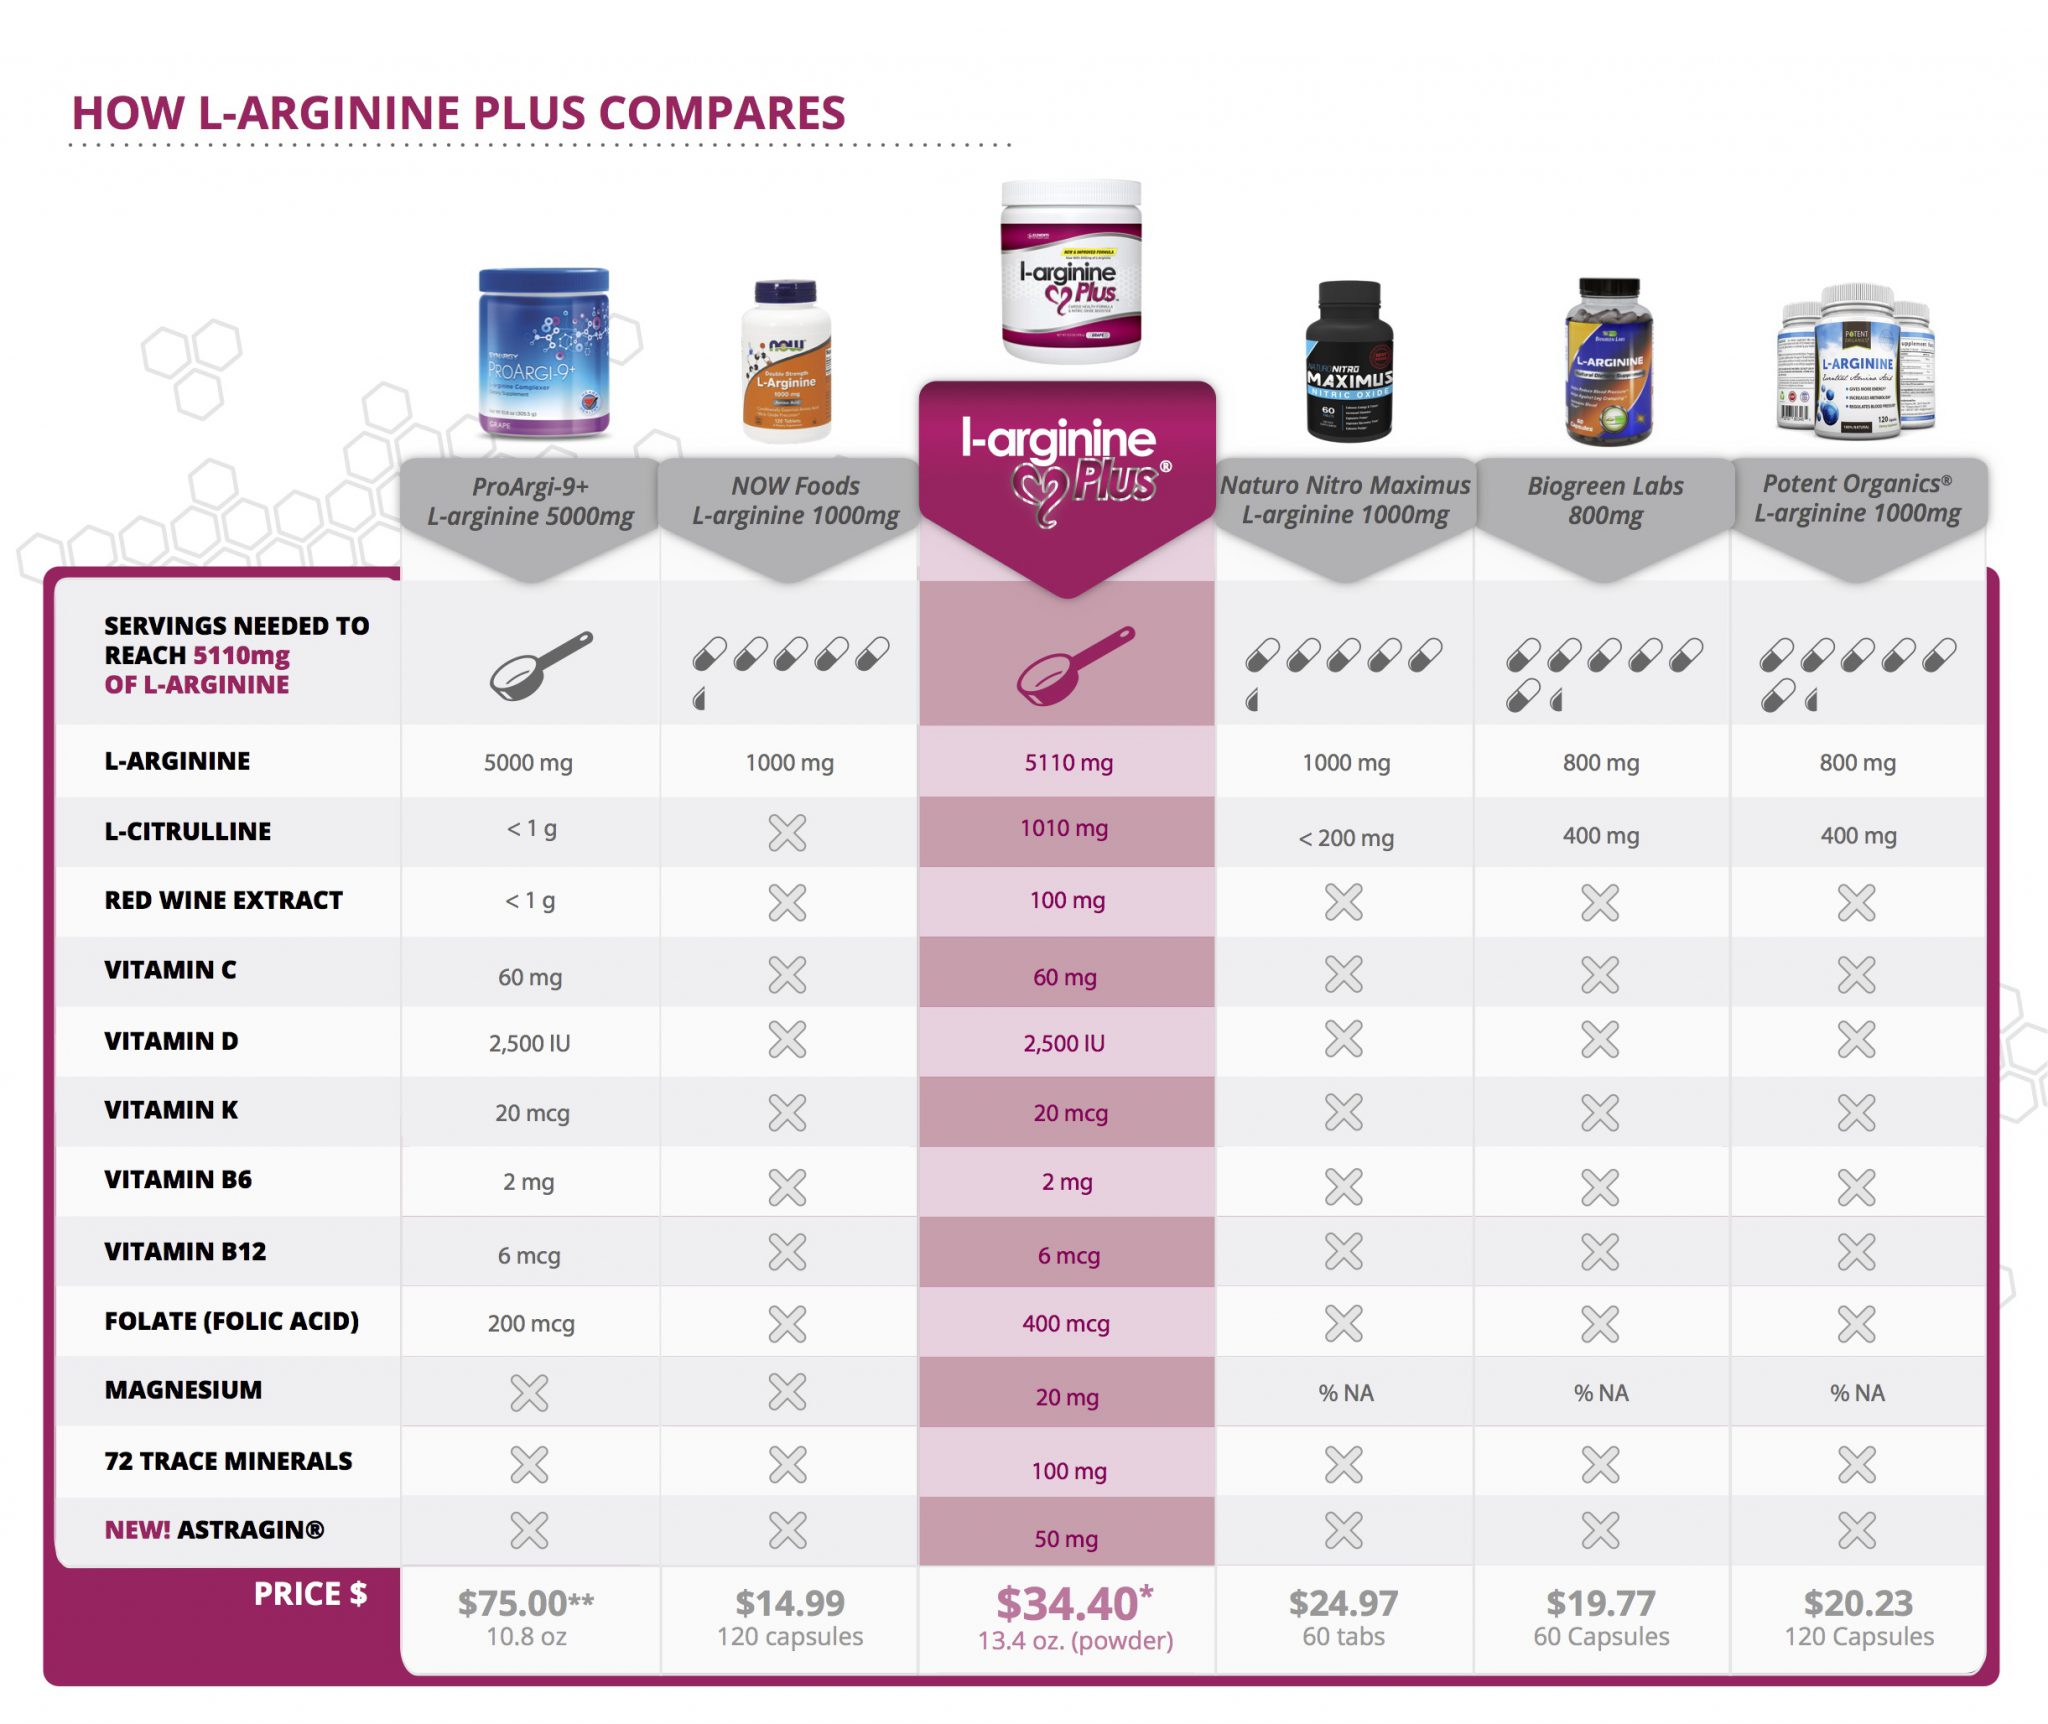 l-arginine plus is the best there is